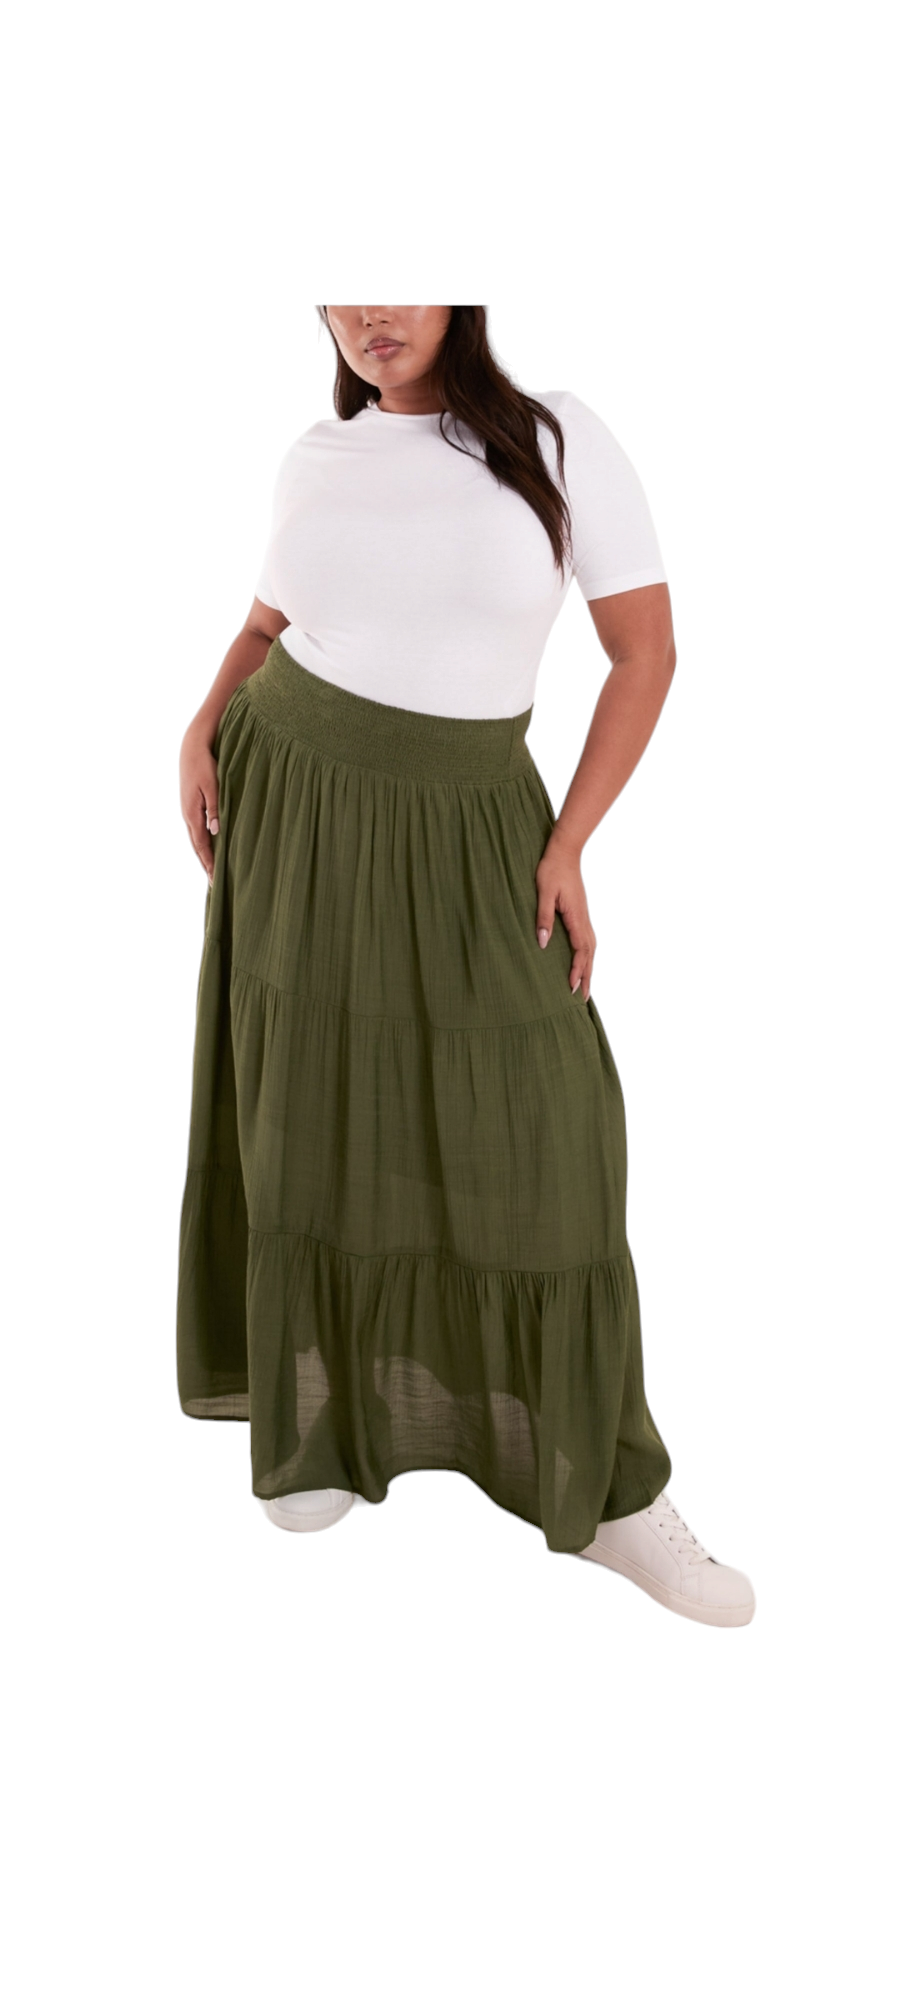 Curve range skirt - in three colours